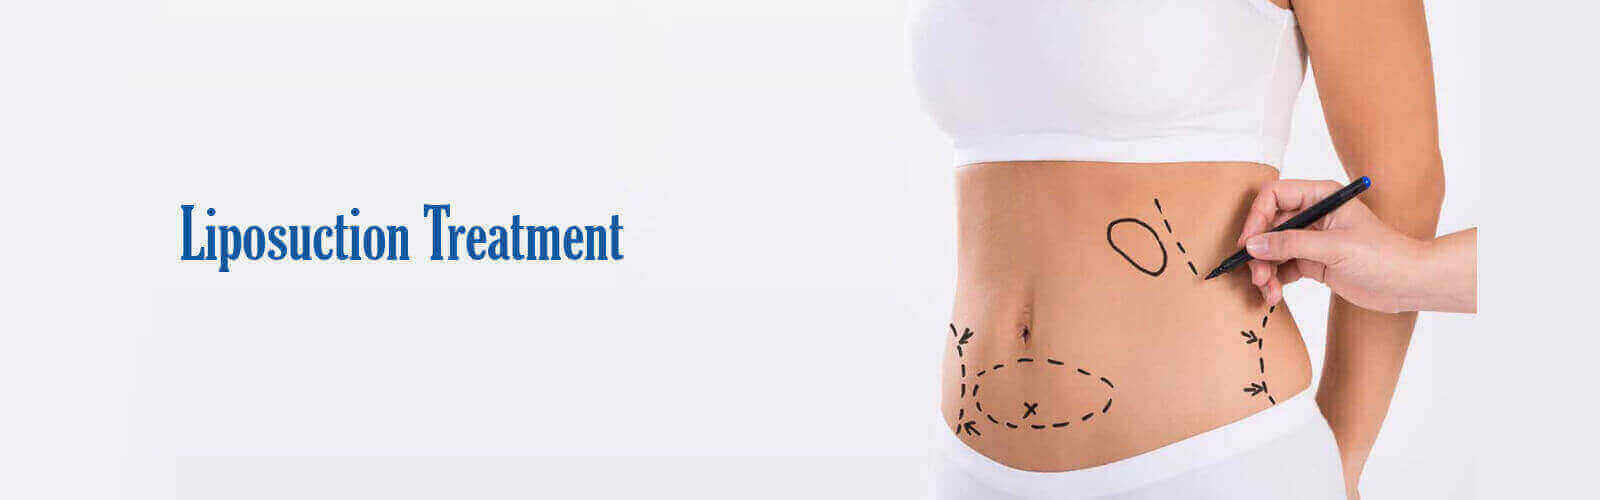 Liposuction Treatment in Liverpool